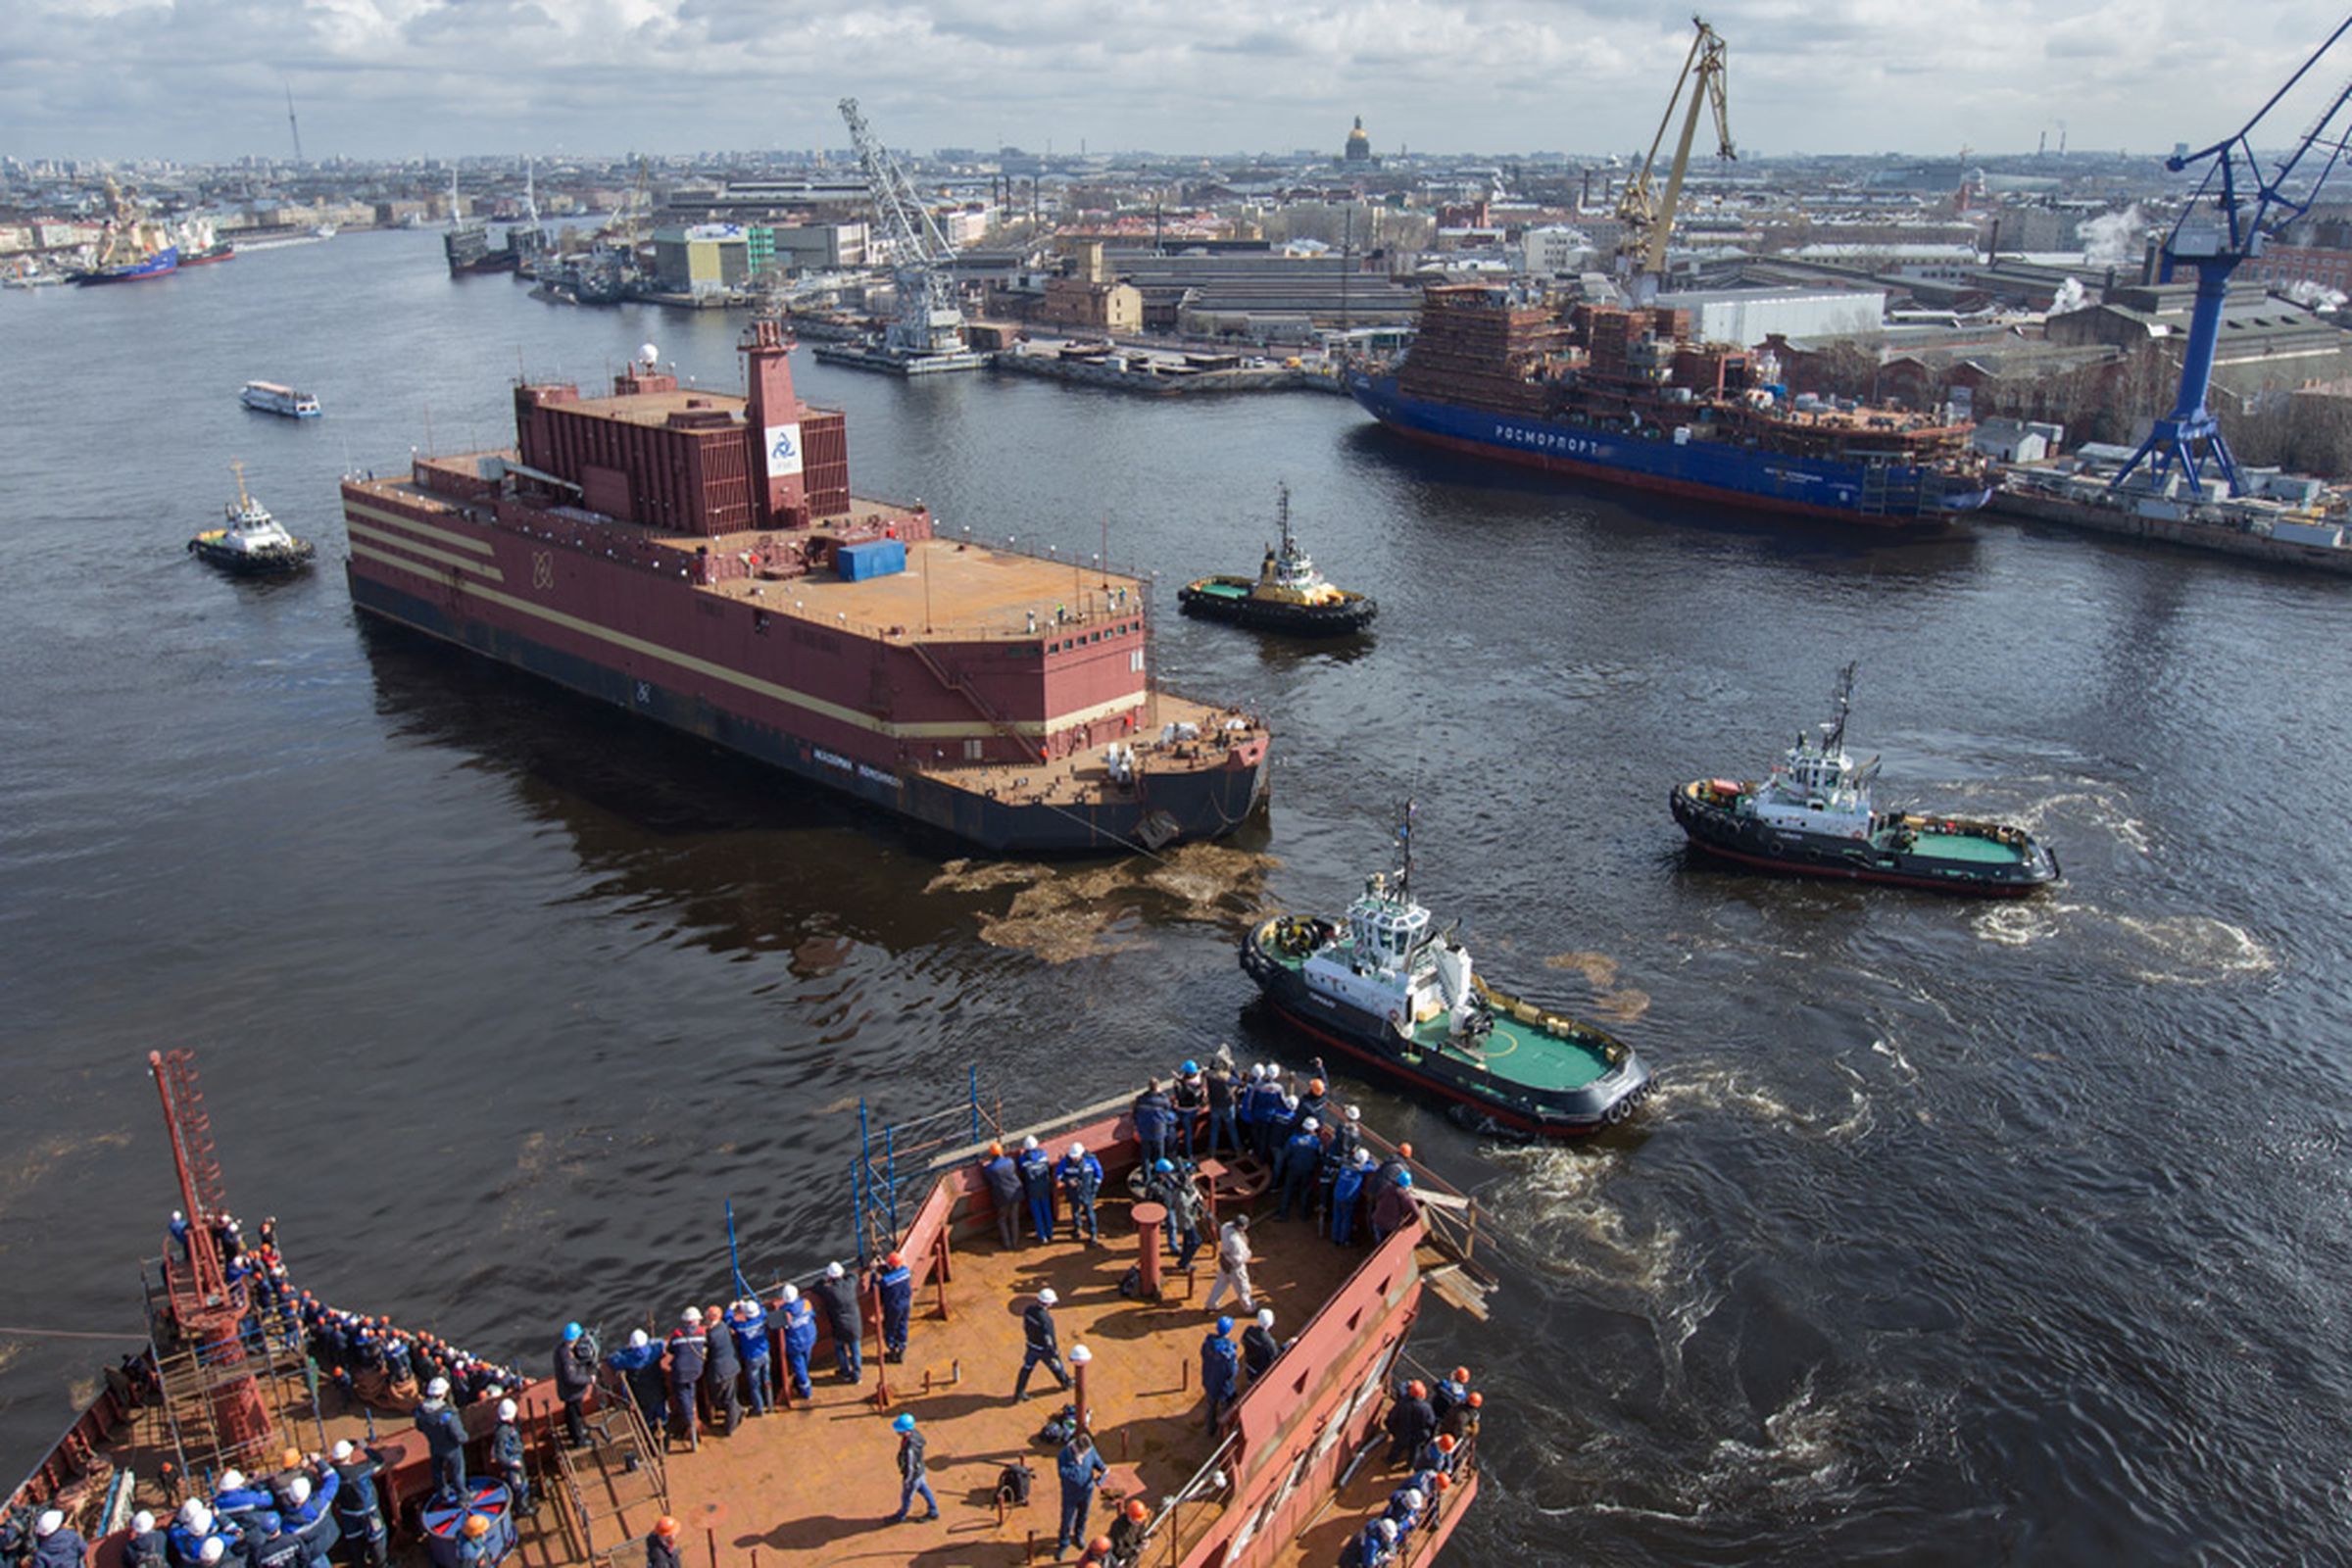 The Academik Lomonosov is being towed from St. Petersburg to Murmansk, Russia, where it will fuel up. 